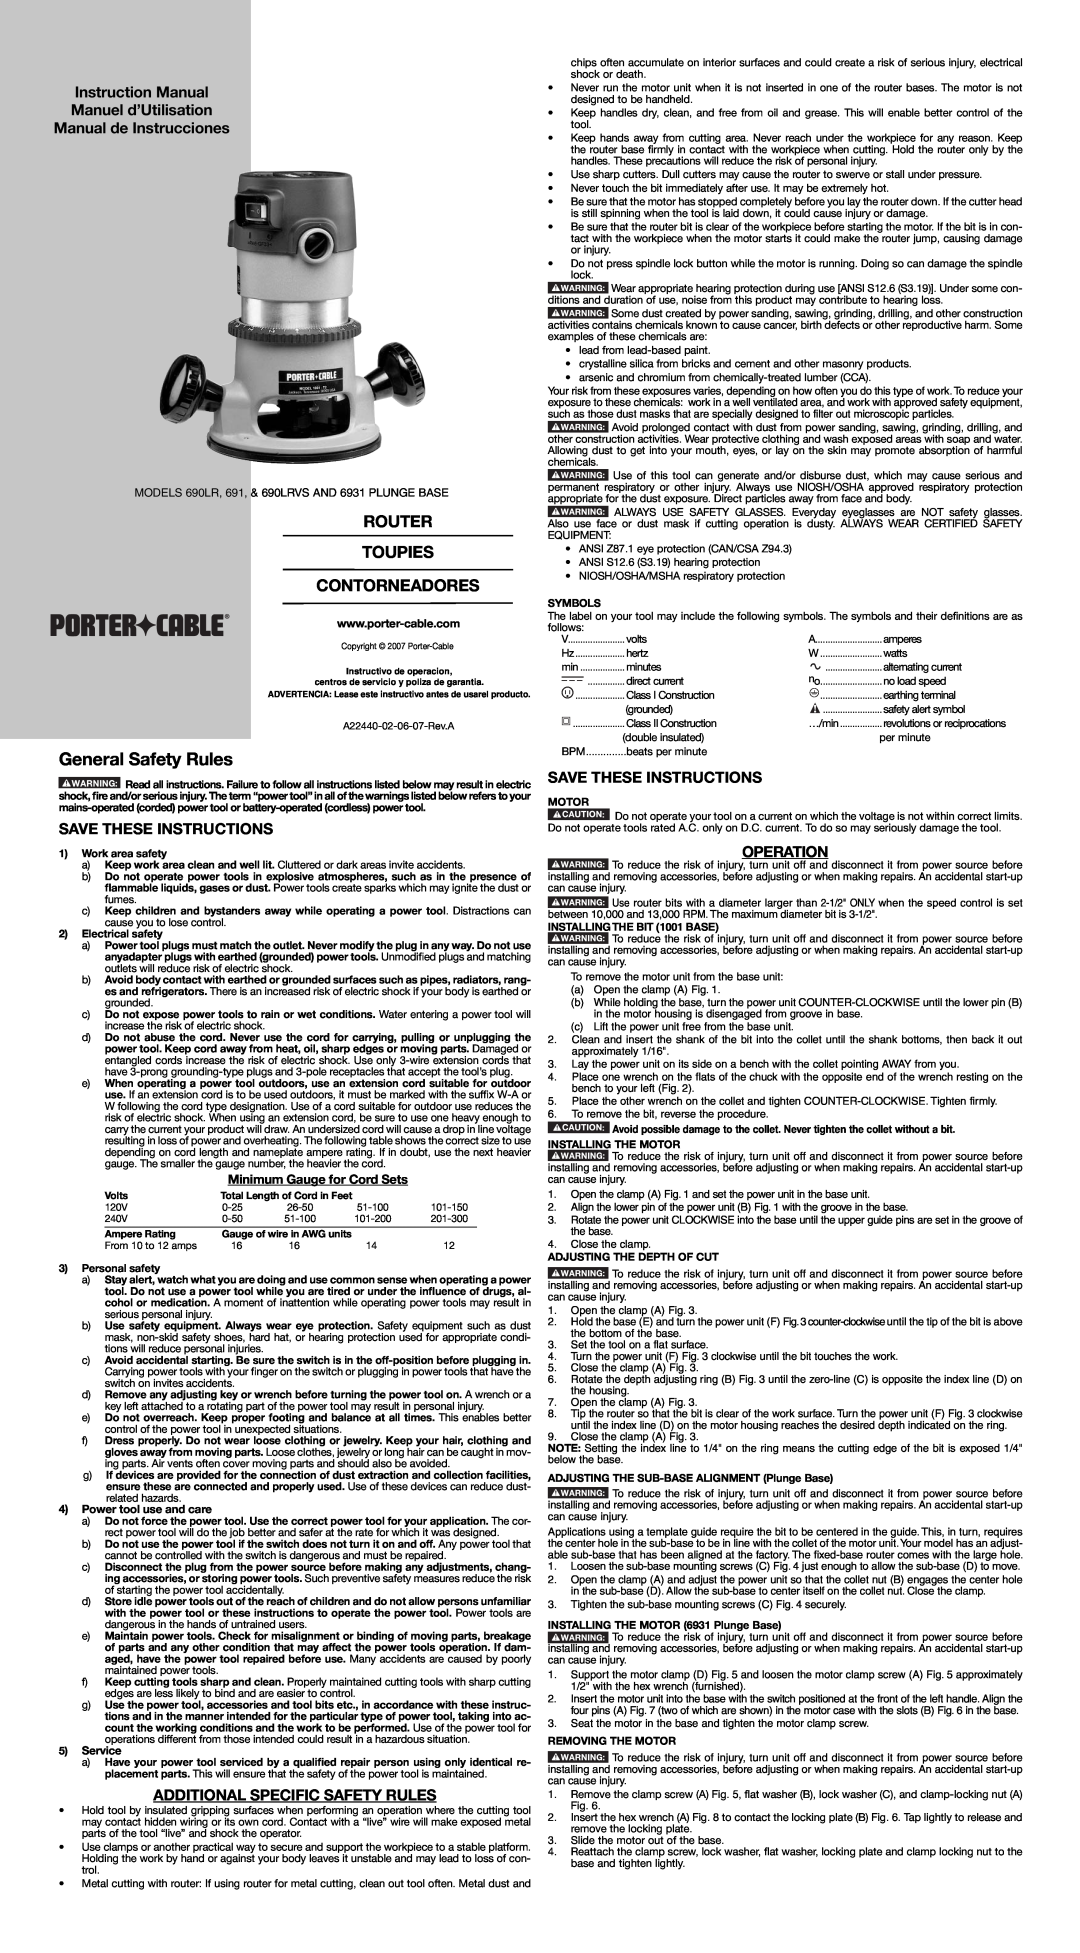 Porter-Cable A22440 instruction manual General Safety Rules, Save These Instructions, Additional Specific Safety Rules 